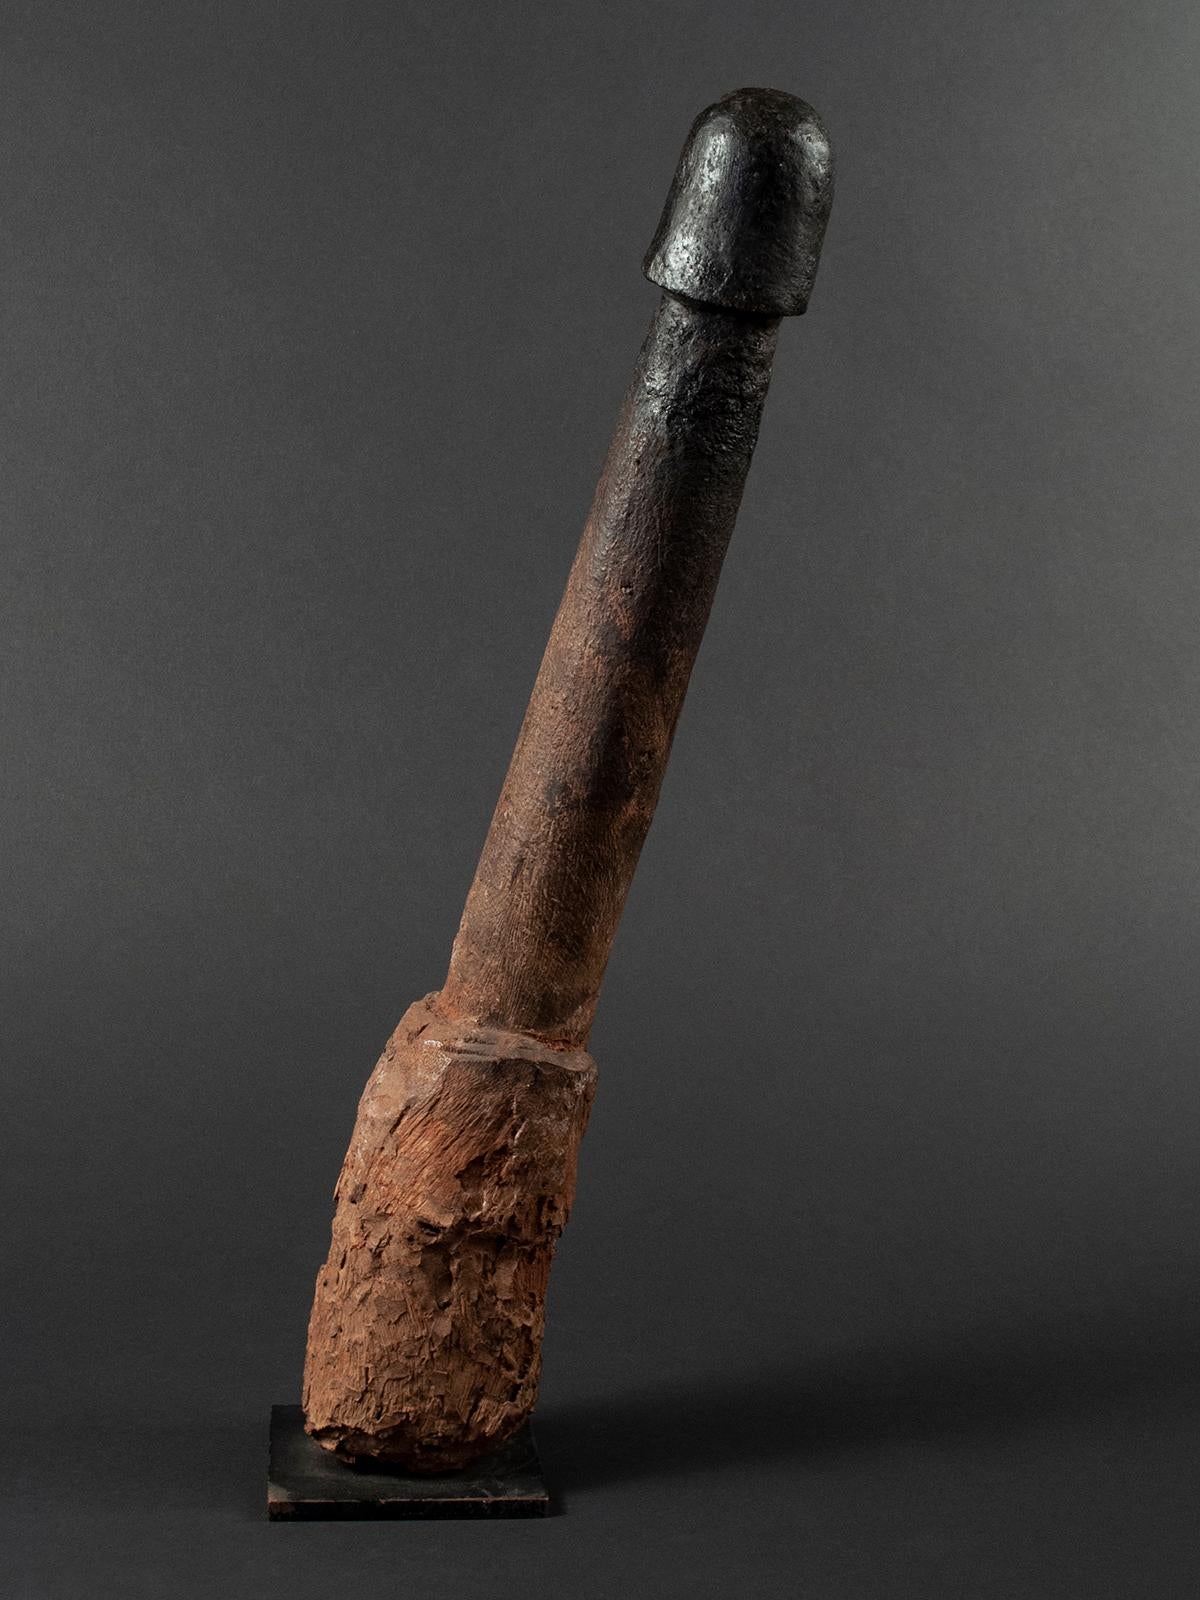 Late 19th-early 20th century wood Legba phallus, Fon people, West Africa

A large carved hardwood phallus from the Fon tribe on the border of Togo and Ghana. These are called Legba, named after a deity, and were placed in the ground to stimulate the